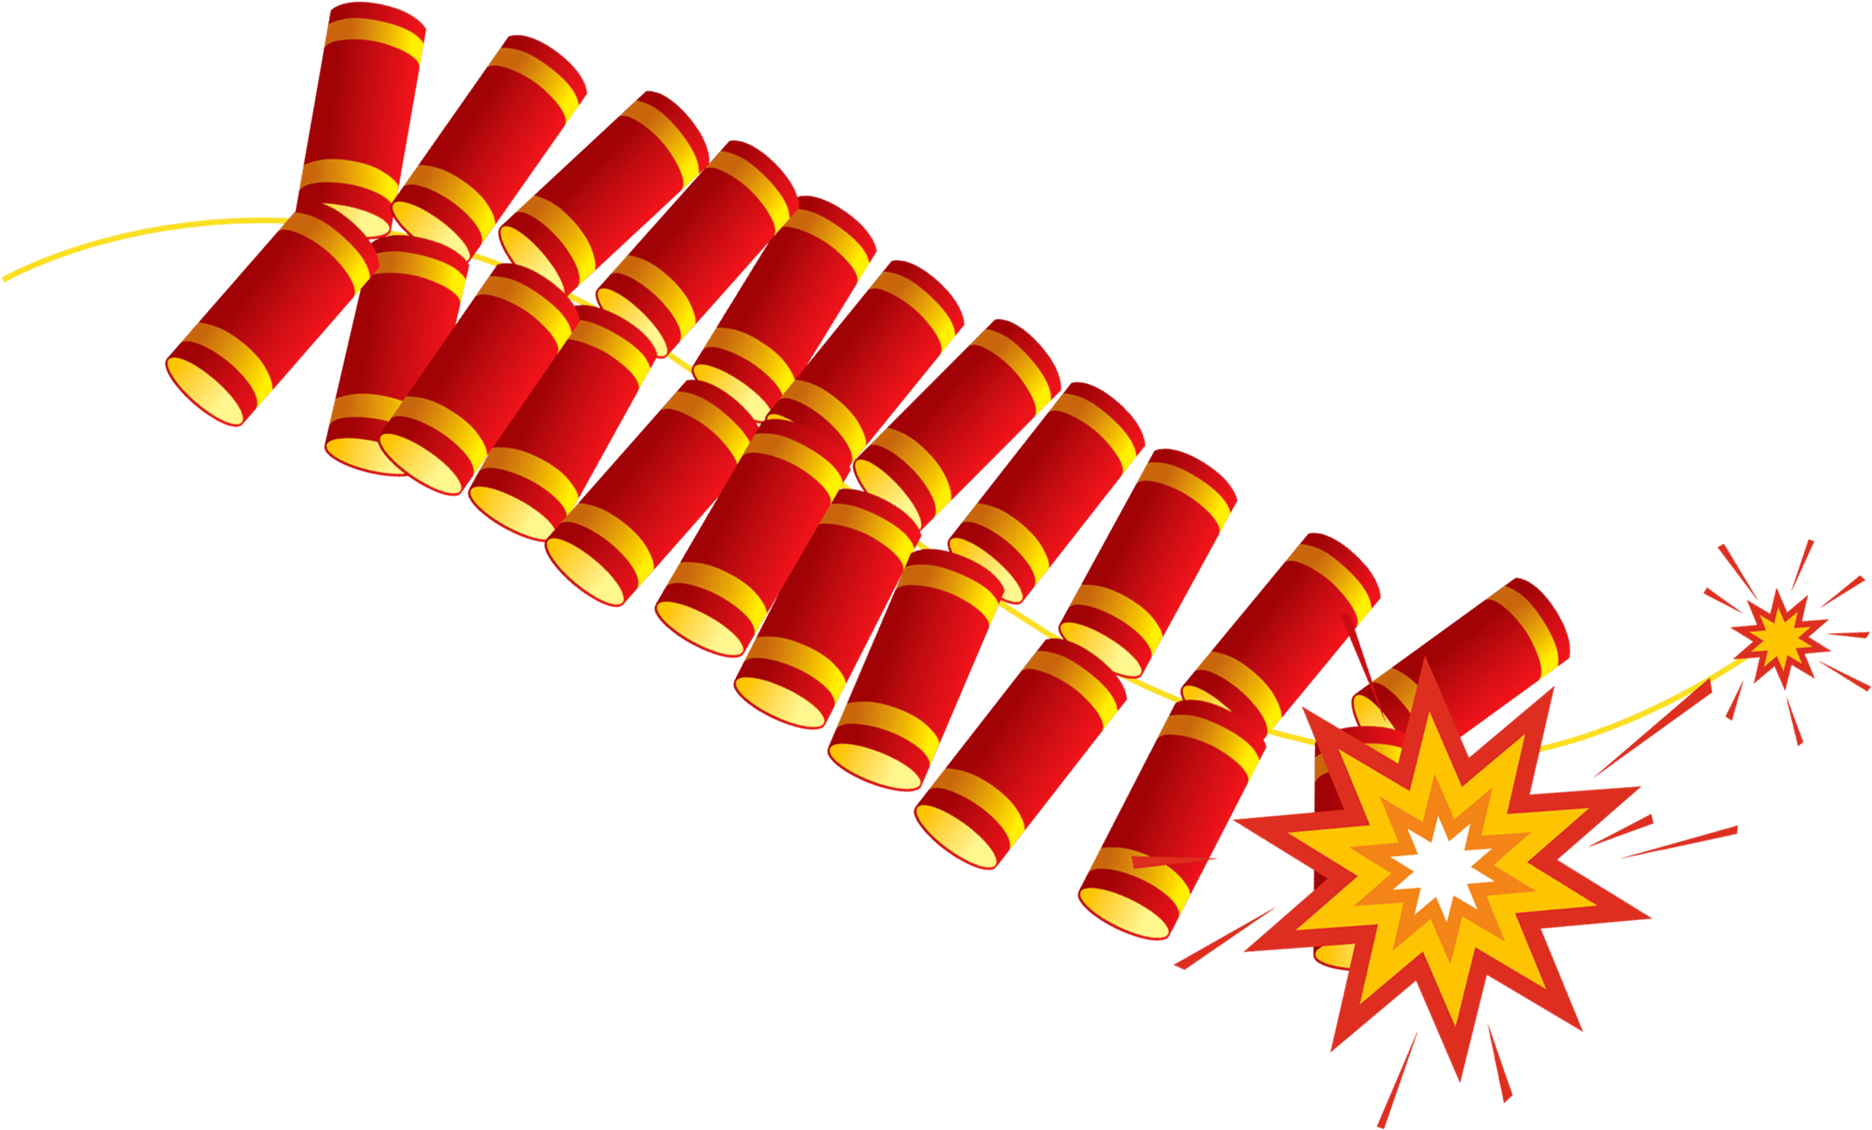 Exploding Firecracker Graphic PNG